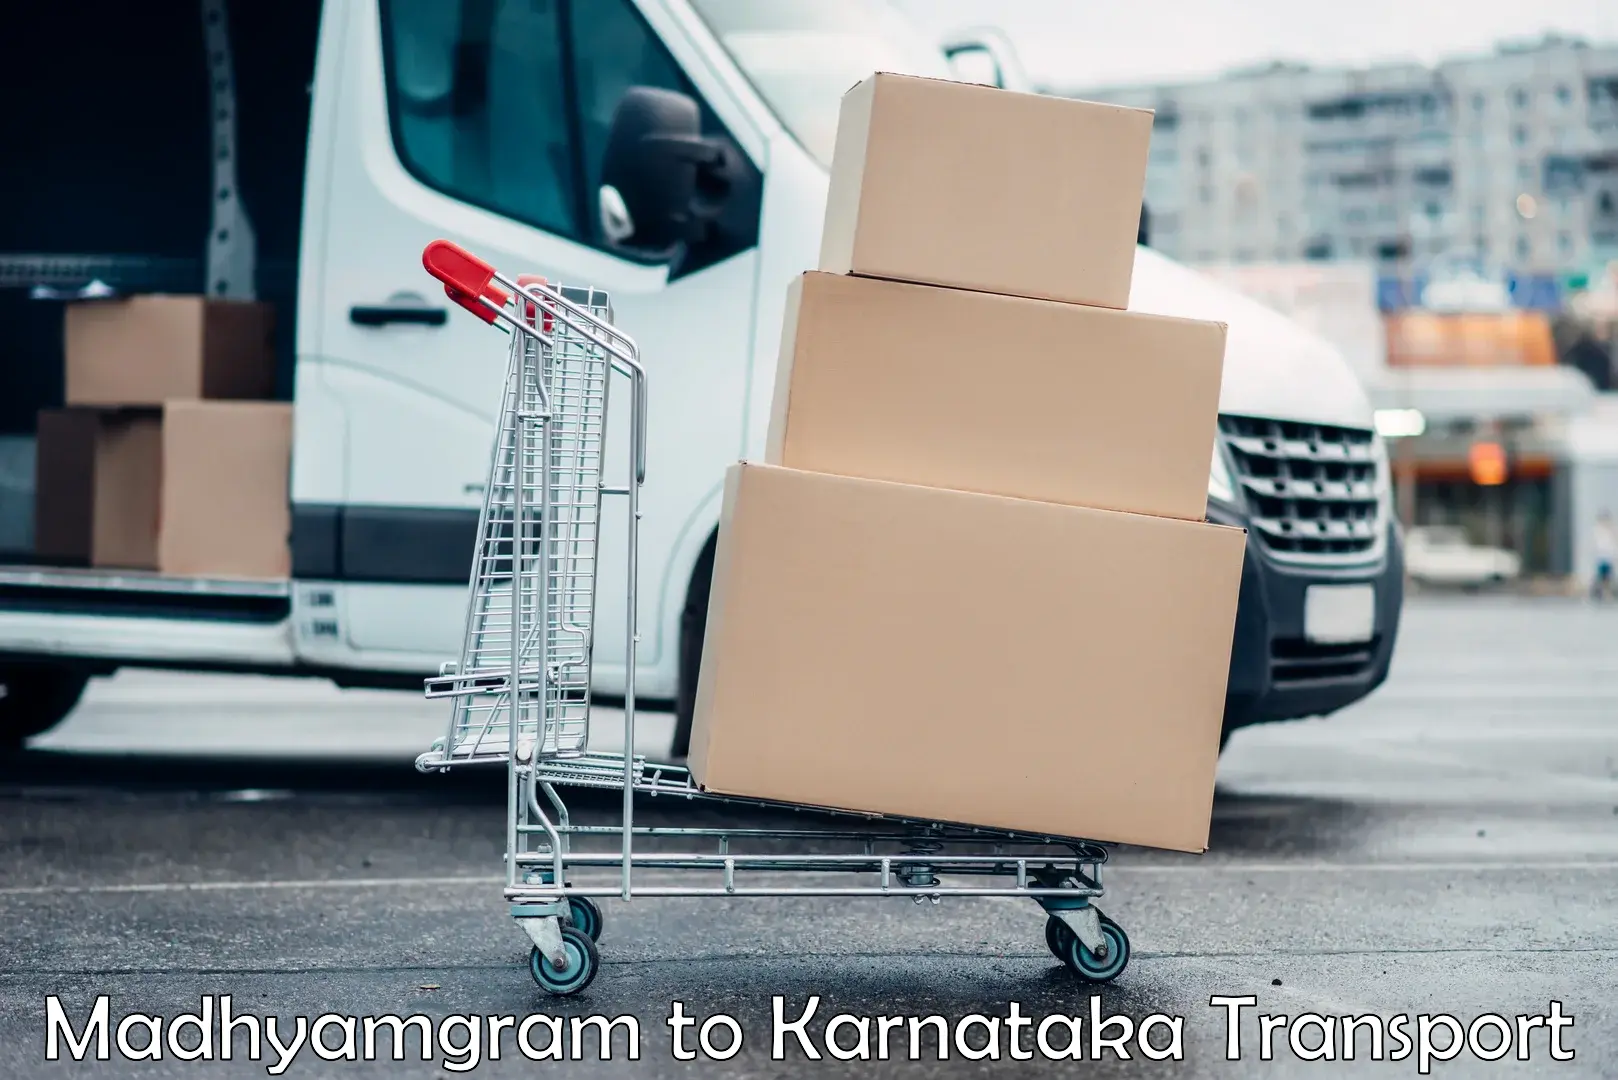 Goods delivery service Madhyamgram to Deodurga